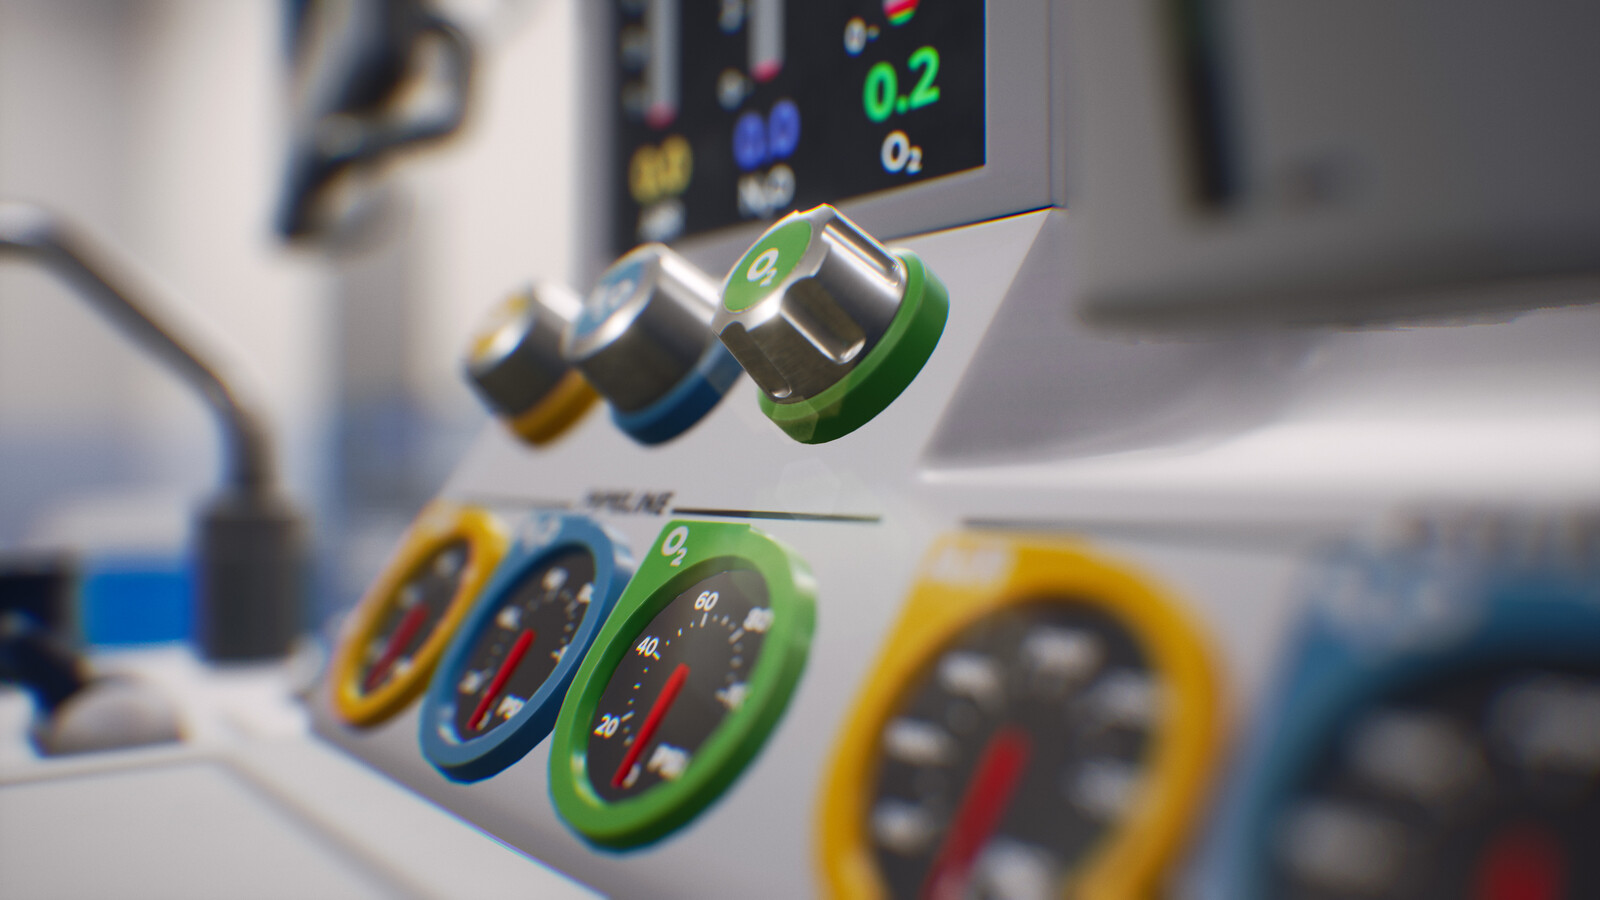 The anesthesia machine was designed from scratch to allow for better usability with VR controllers. I was responsible for concepting the machine so it would be easy to use in VR.